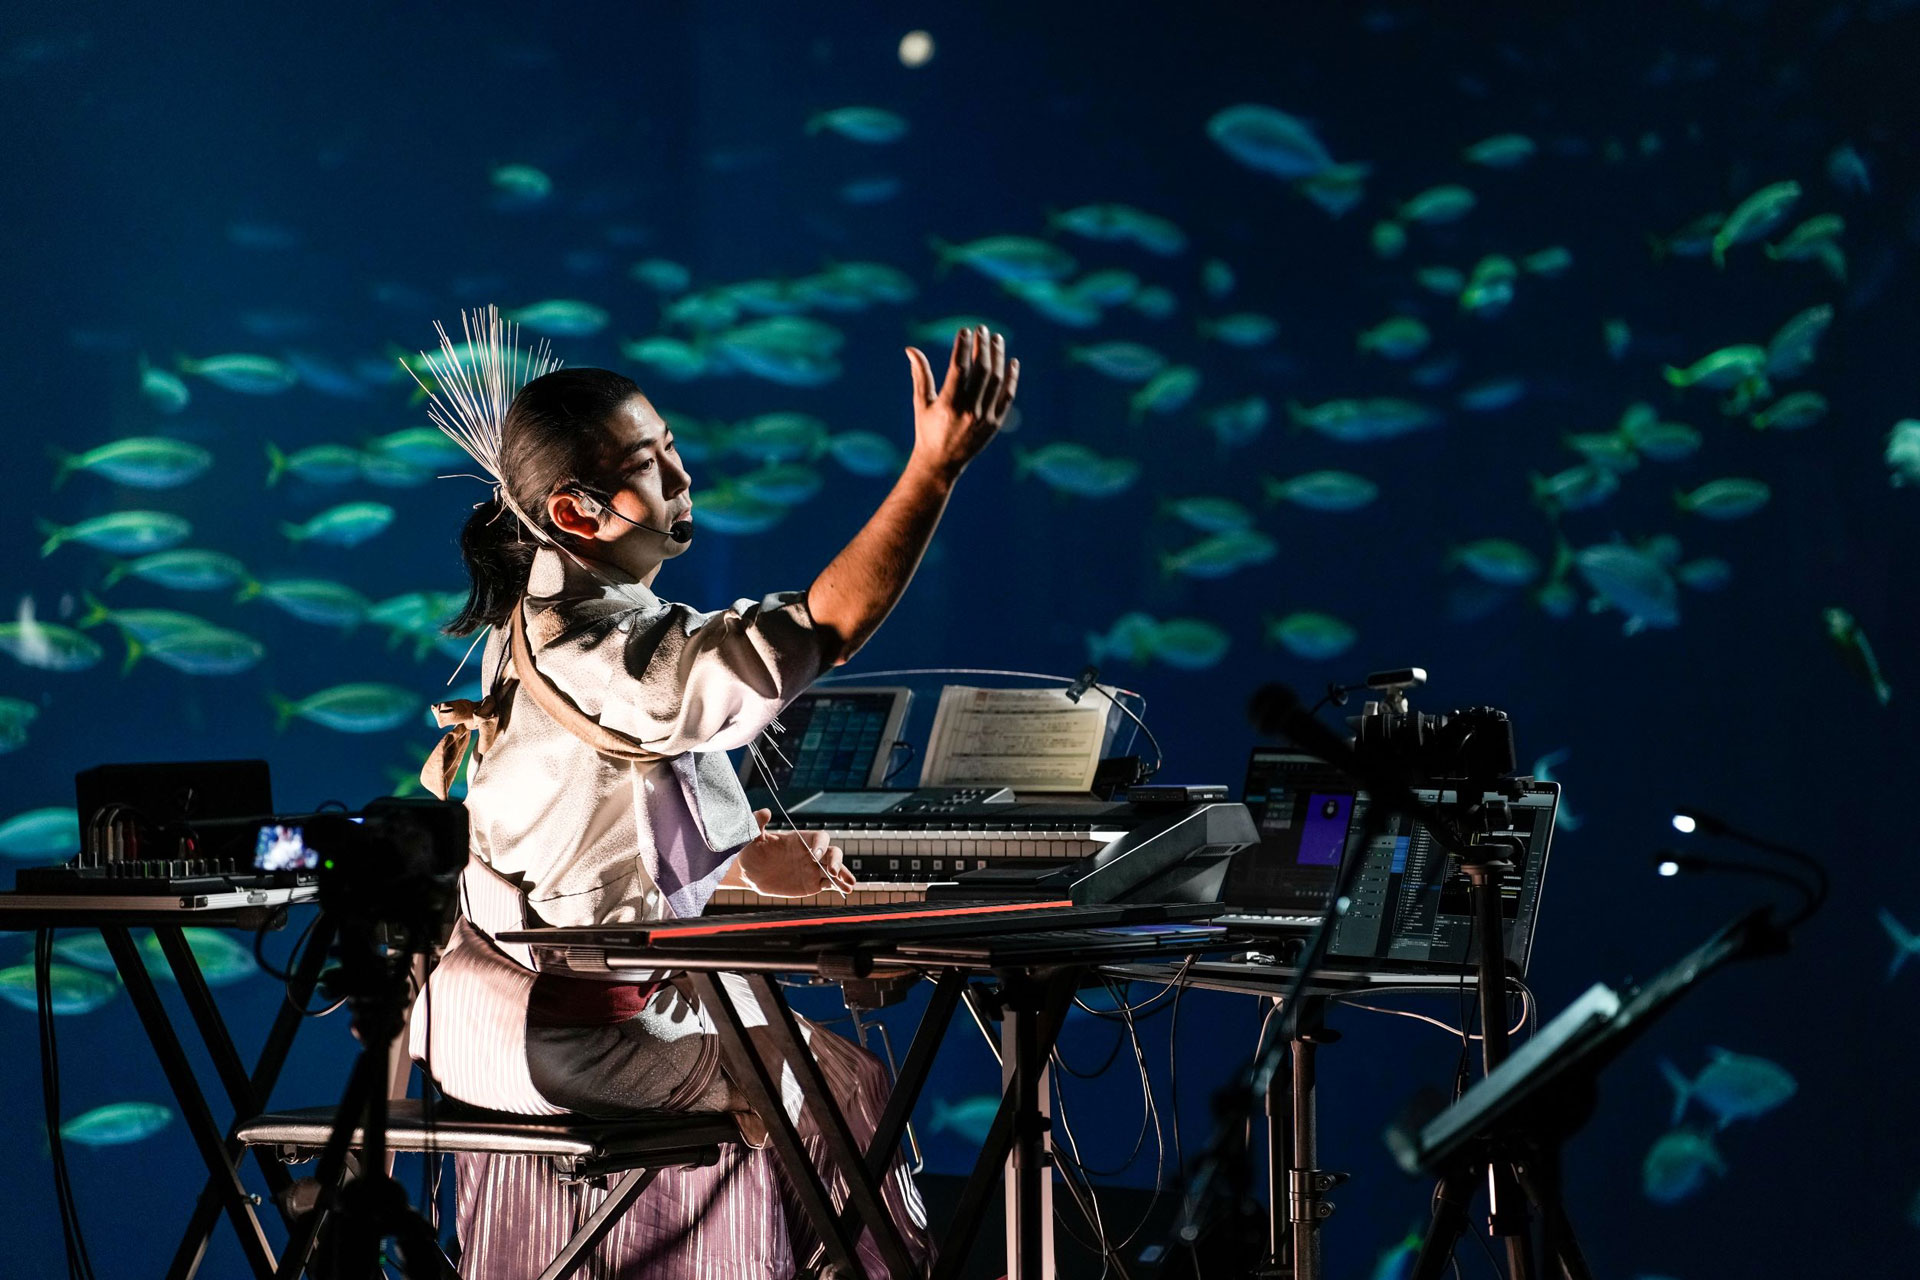 LIT Talent Awards - One Man Orchestra On The Cutting-Edge Electronic Instruments